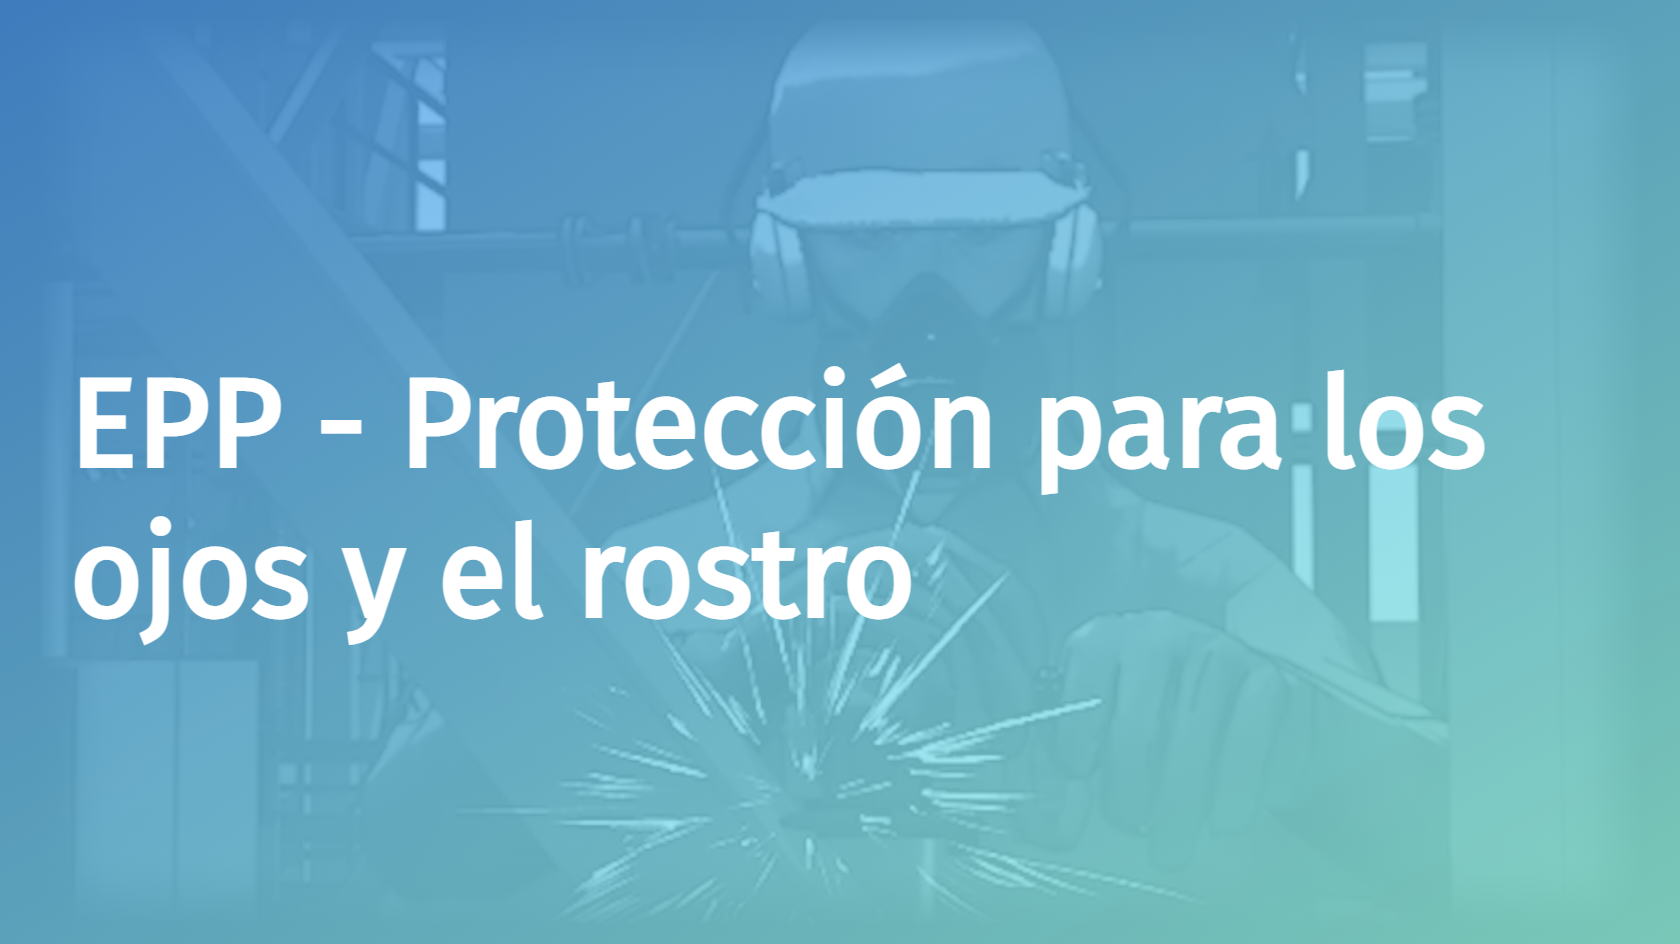 Spanish - PPE - Eye and Face Protection